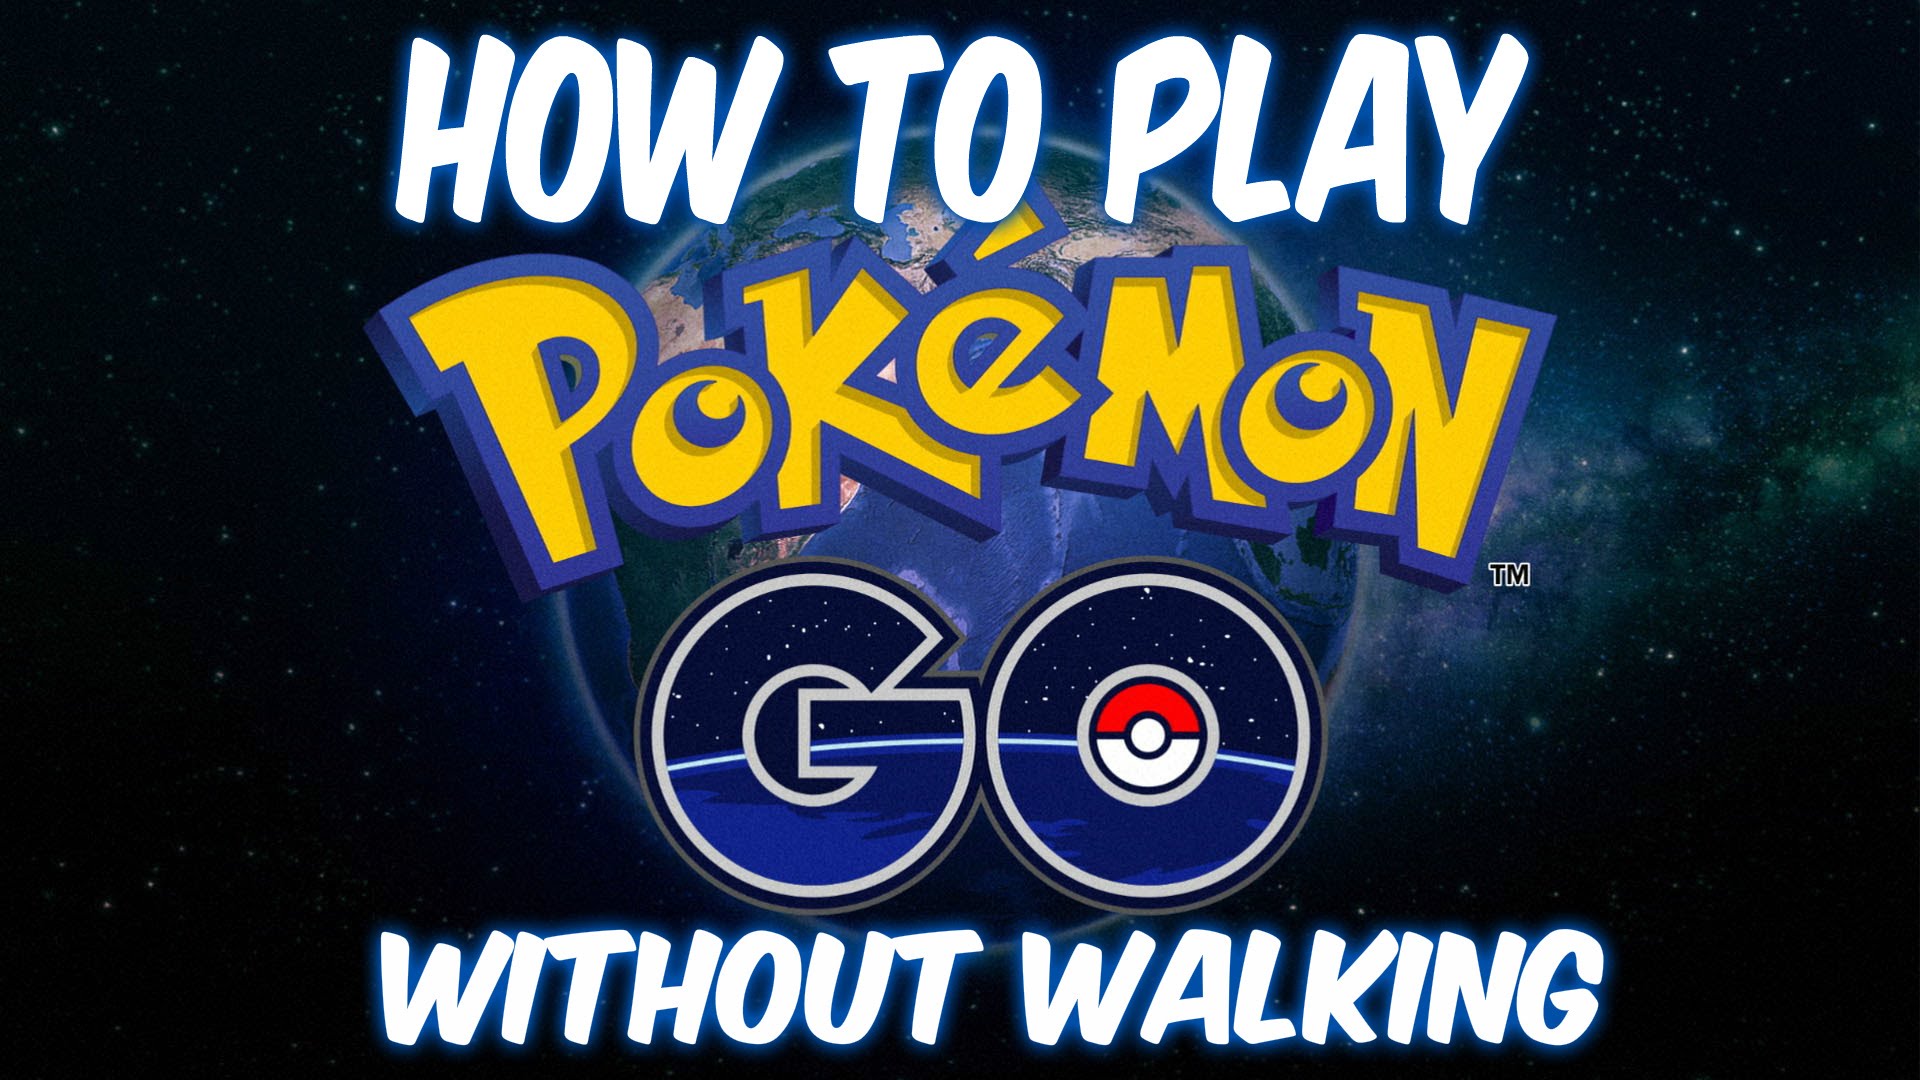 Pokemon Go: How to Play Pokemon Go Game Without Walking or Moving